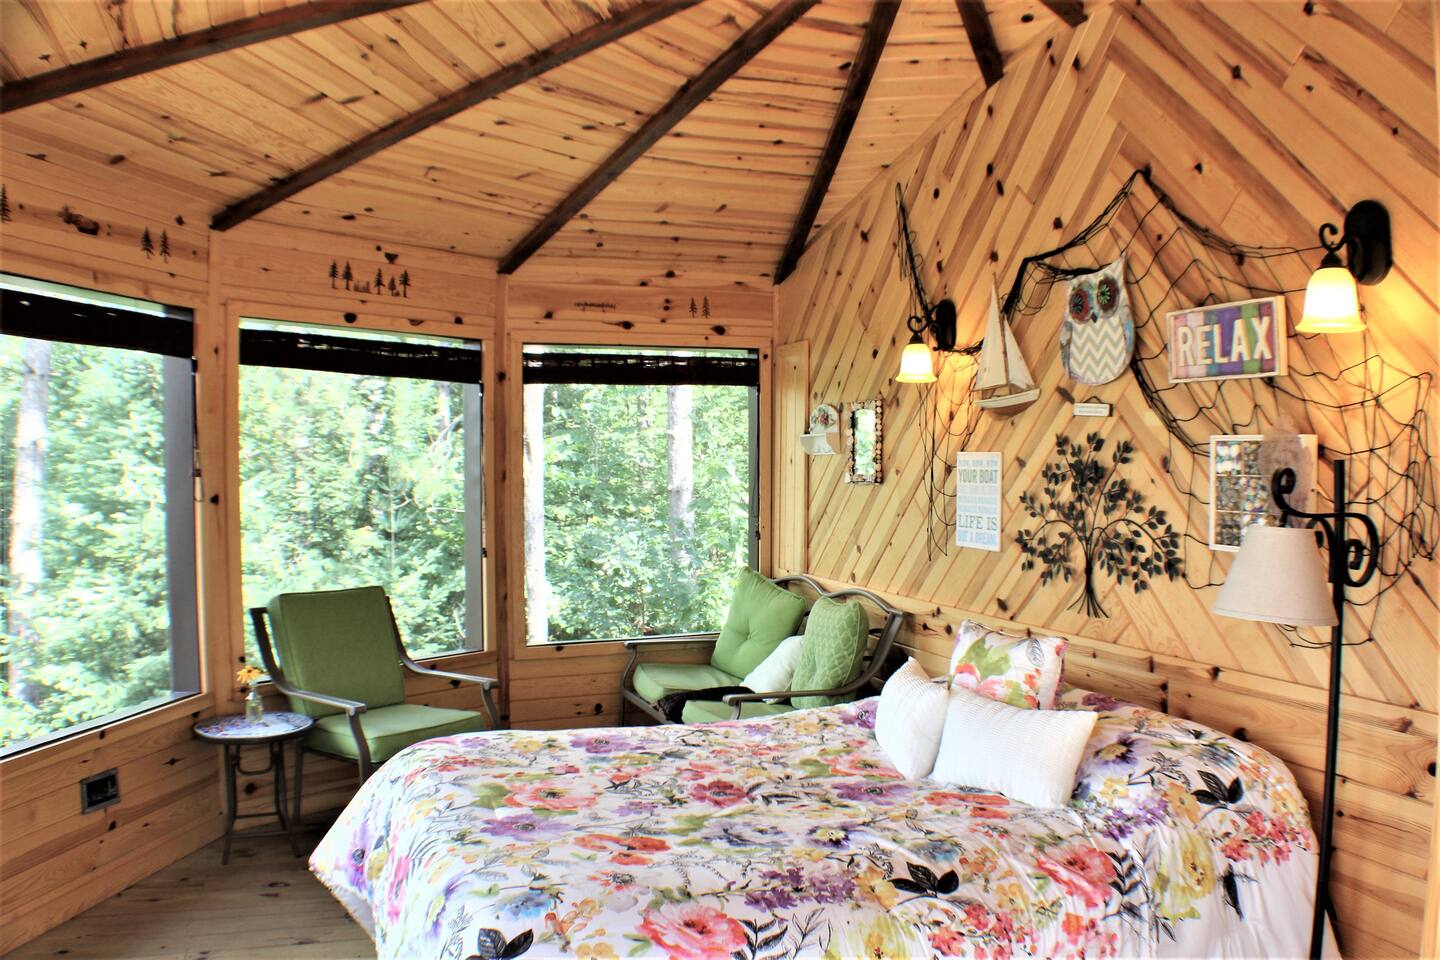 Double bed inside a treehouse